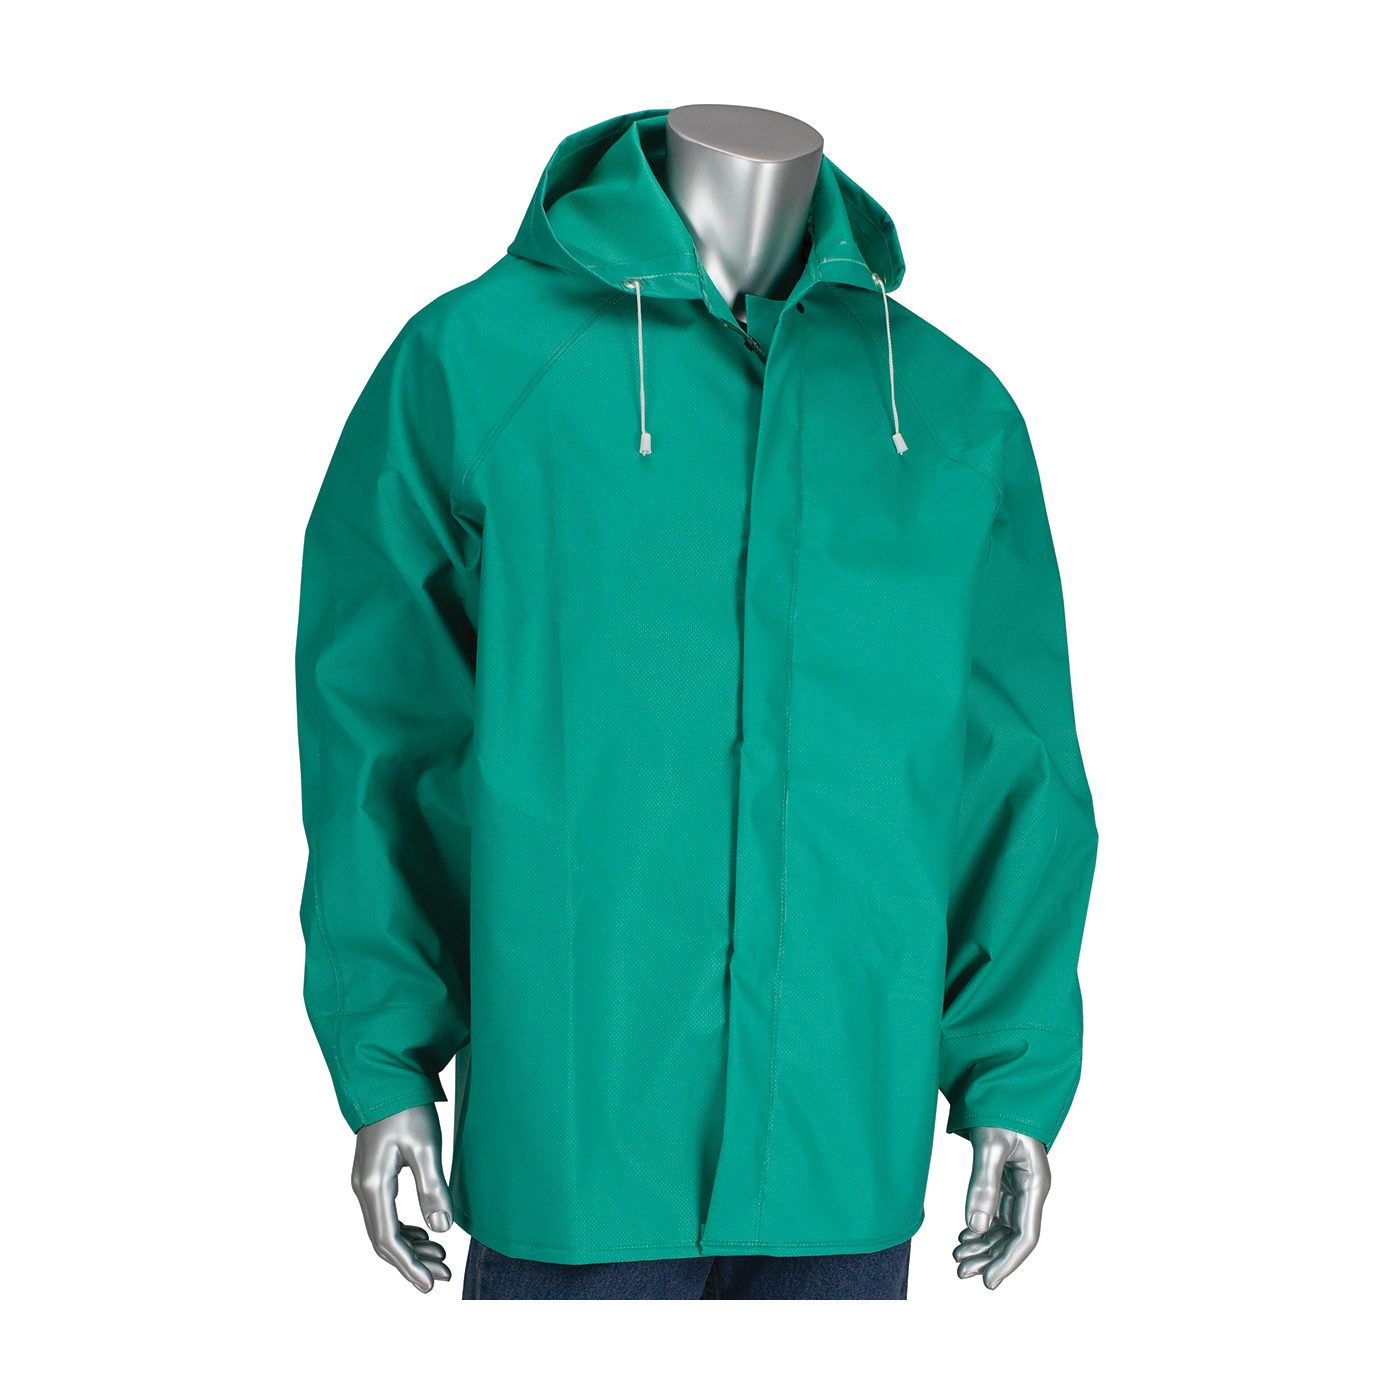 PIP® FALCON™ ChemFR™ 205-420JH/5X Rain Jacket With Hood, 5XL, Green, Nylon/PVC, Resists: Flame and Water, ASTM D6413